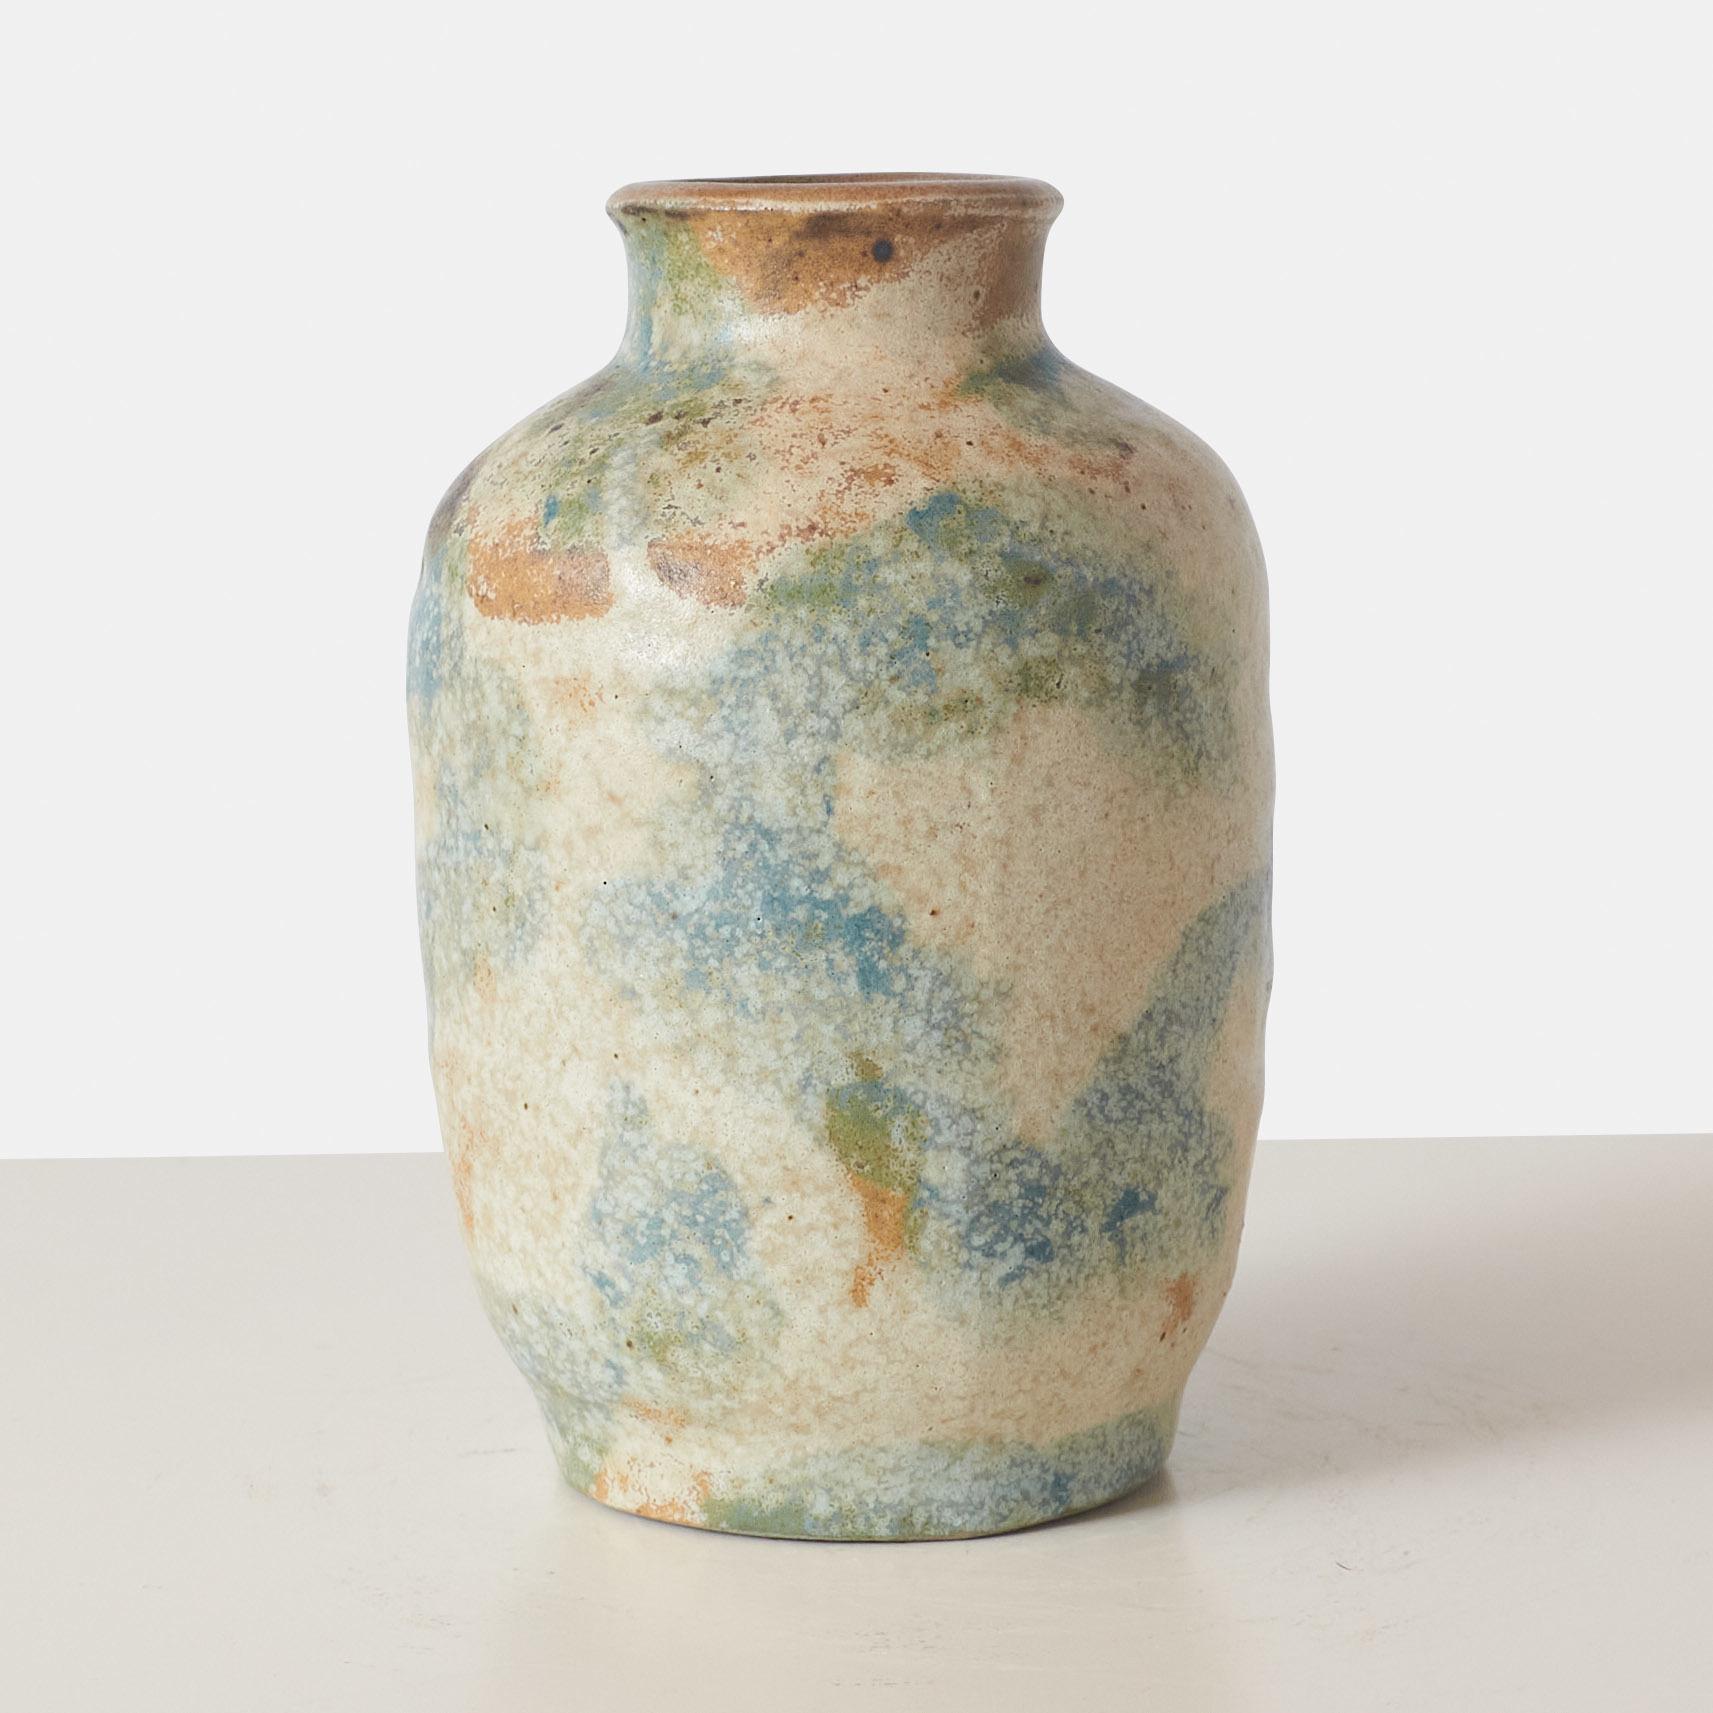 A stoneware vase created by Danish ceramic artist Bode Willumsen features a unique frosting technique that creates a textured, frosted appearance in white, blue, and green hues. Willumsen, who had his own workshop, is known for his intricate designs